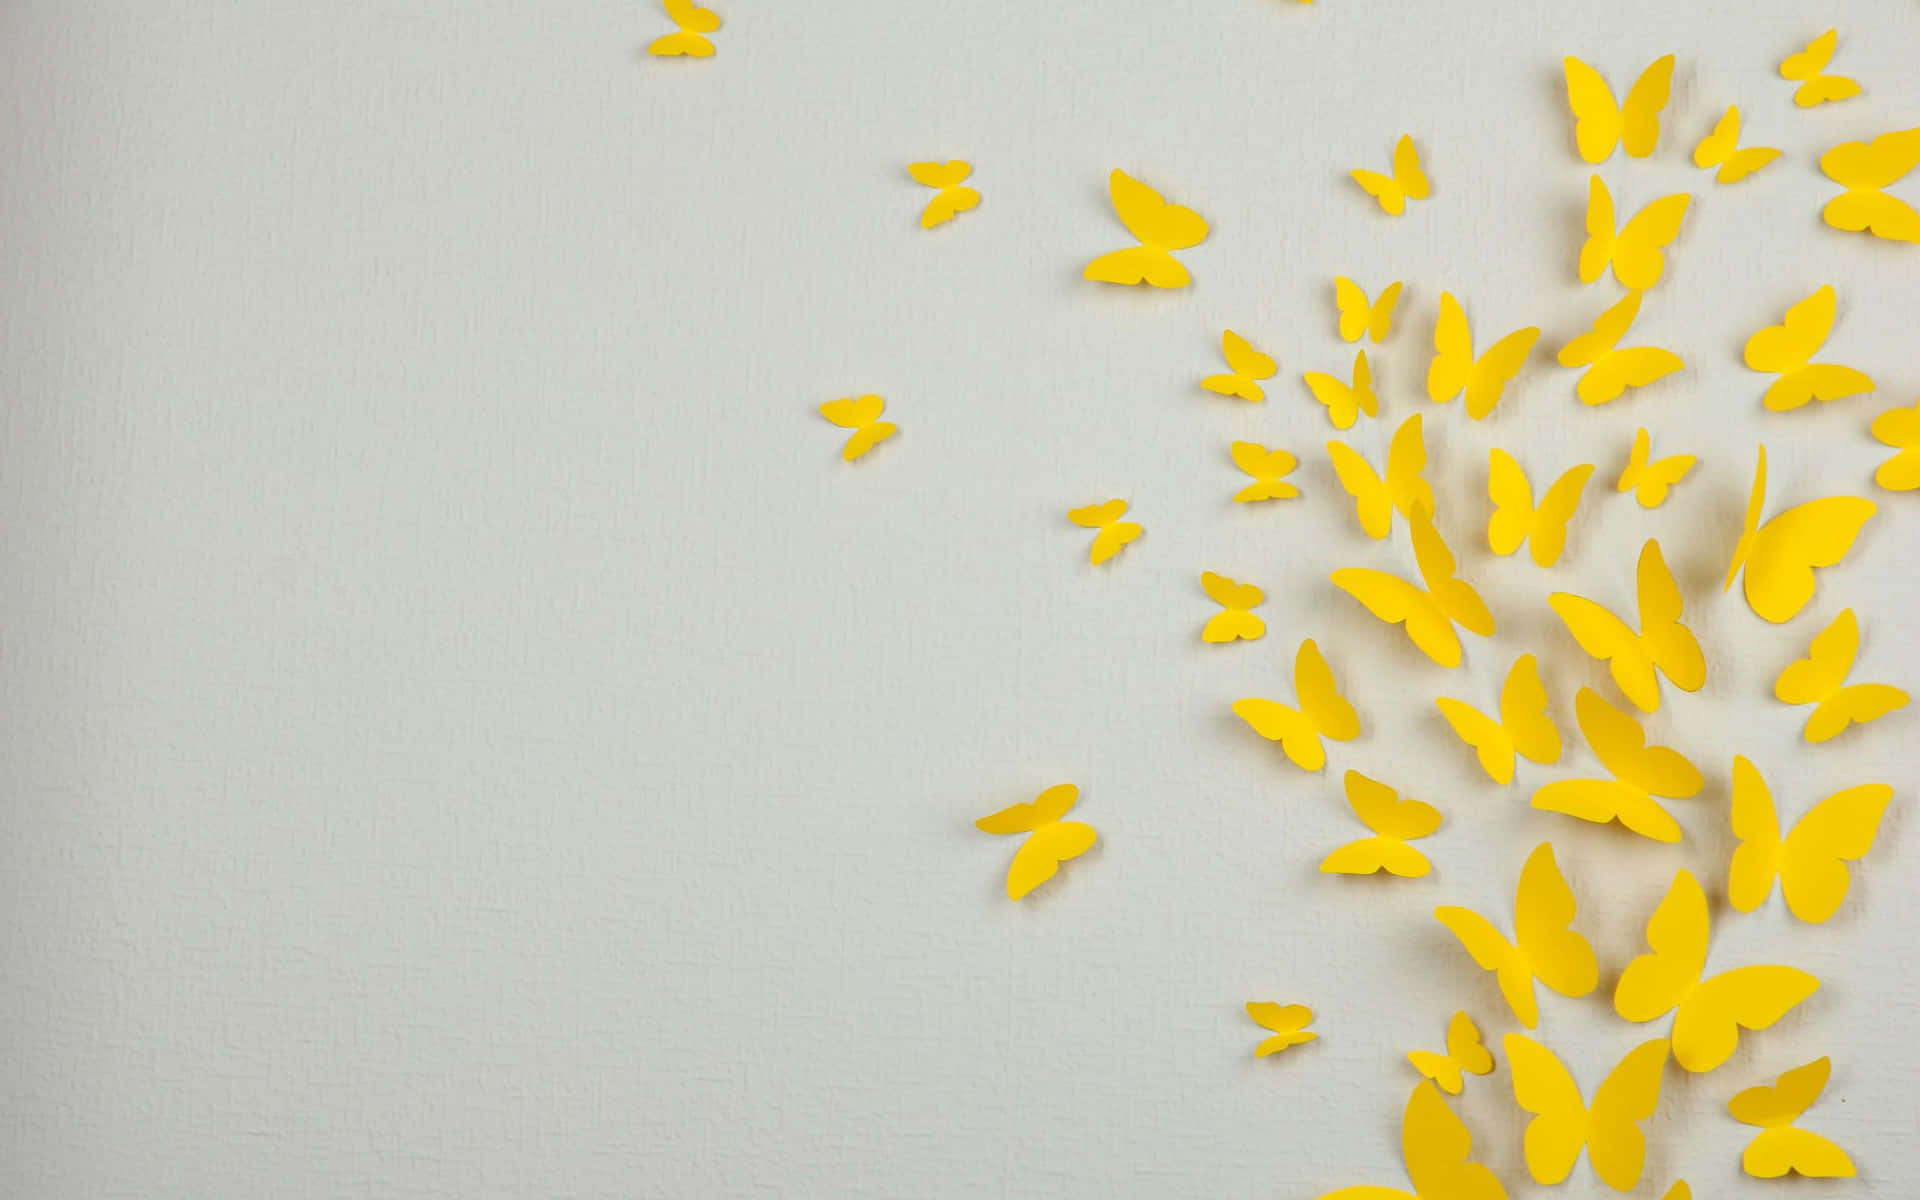 Brighten up your day with this cheerful yellow background!